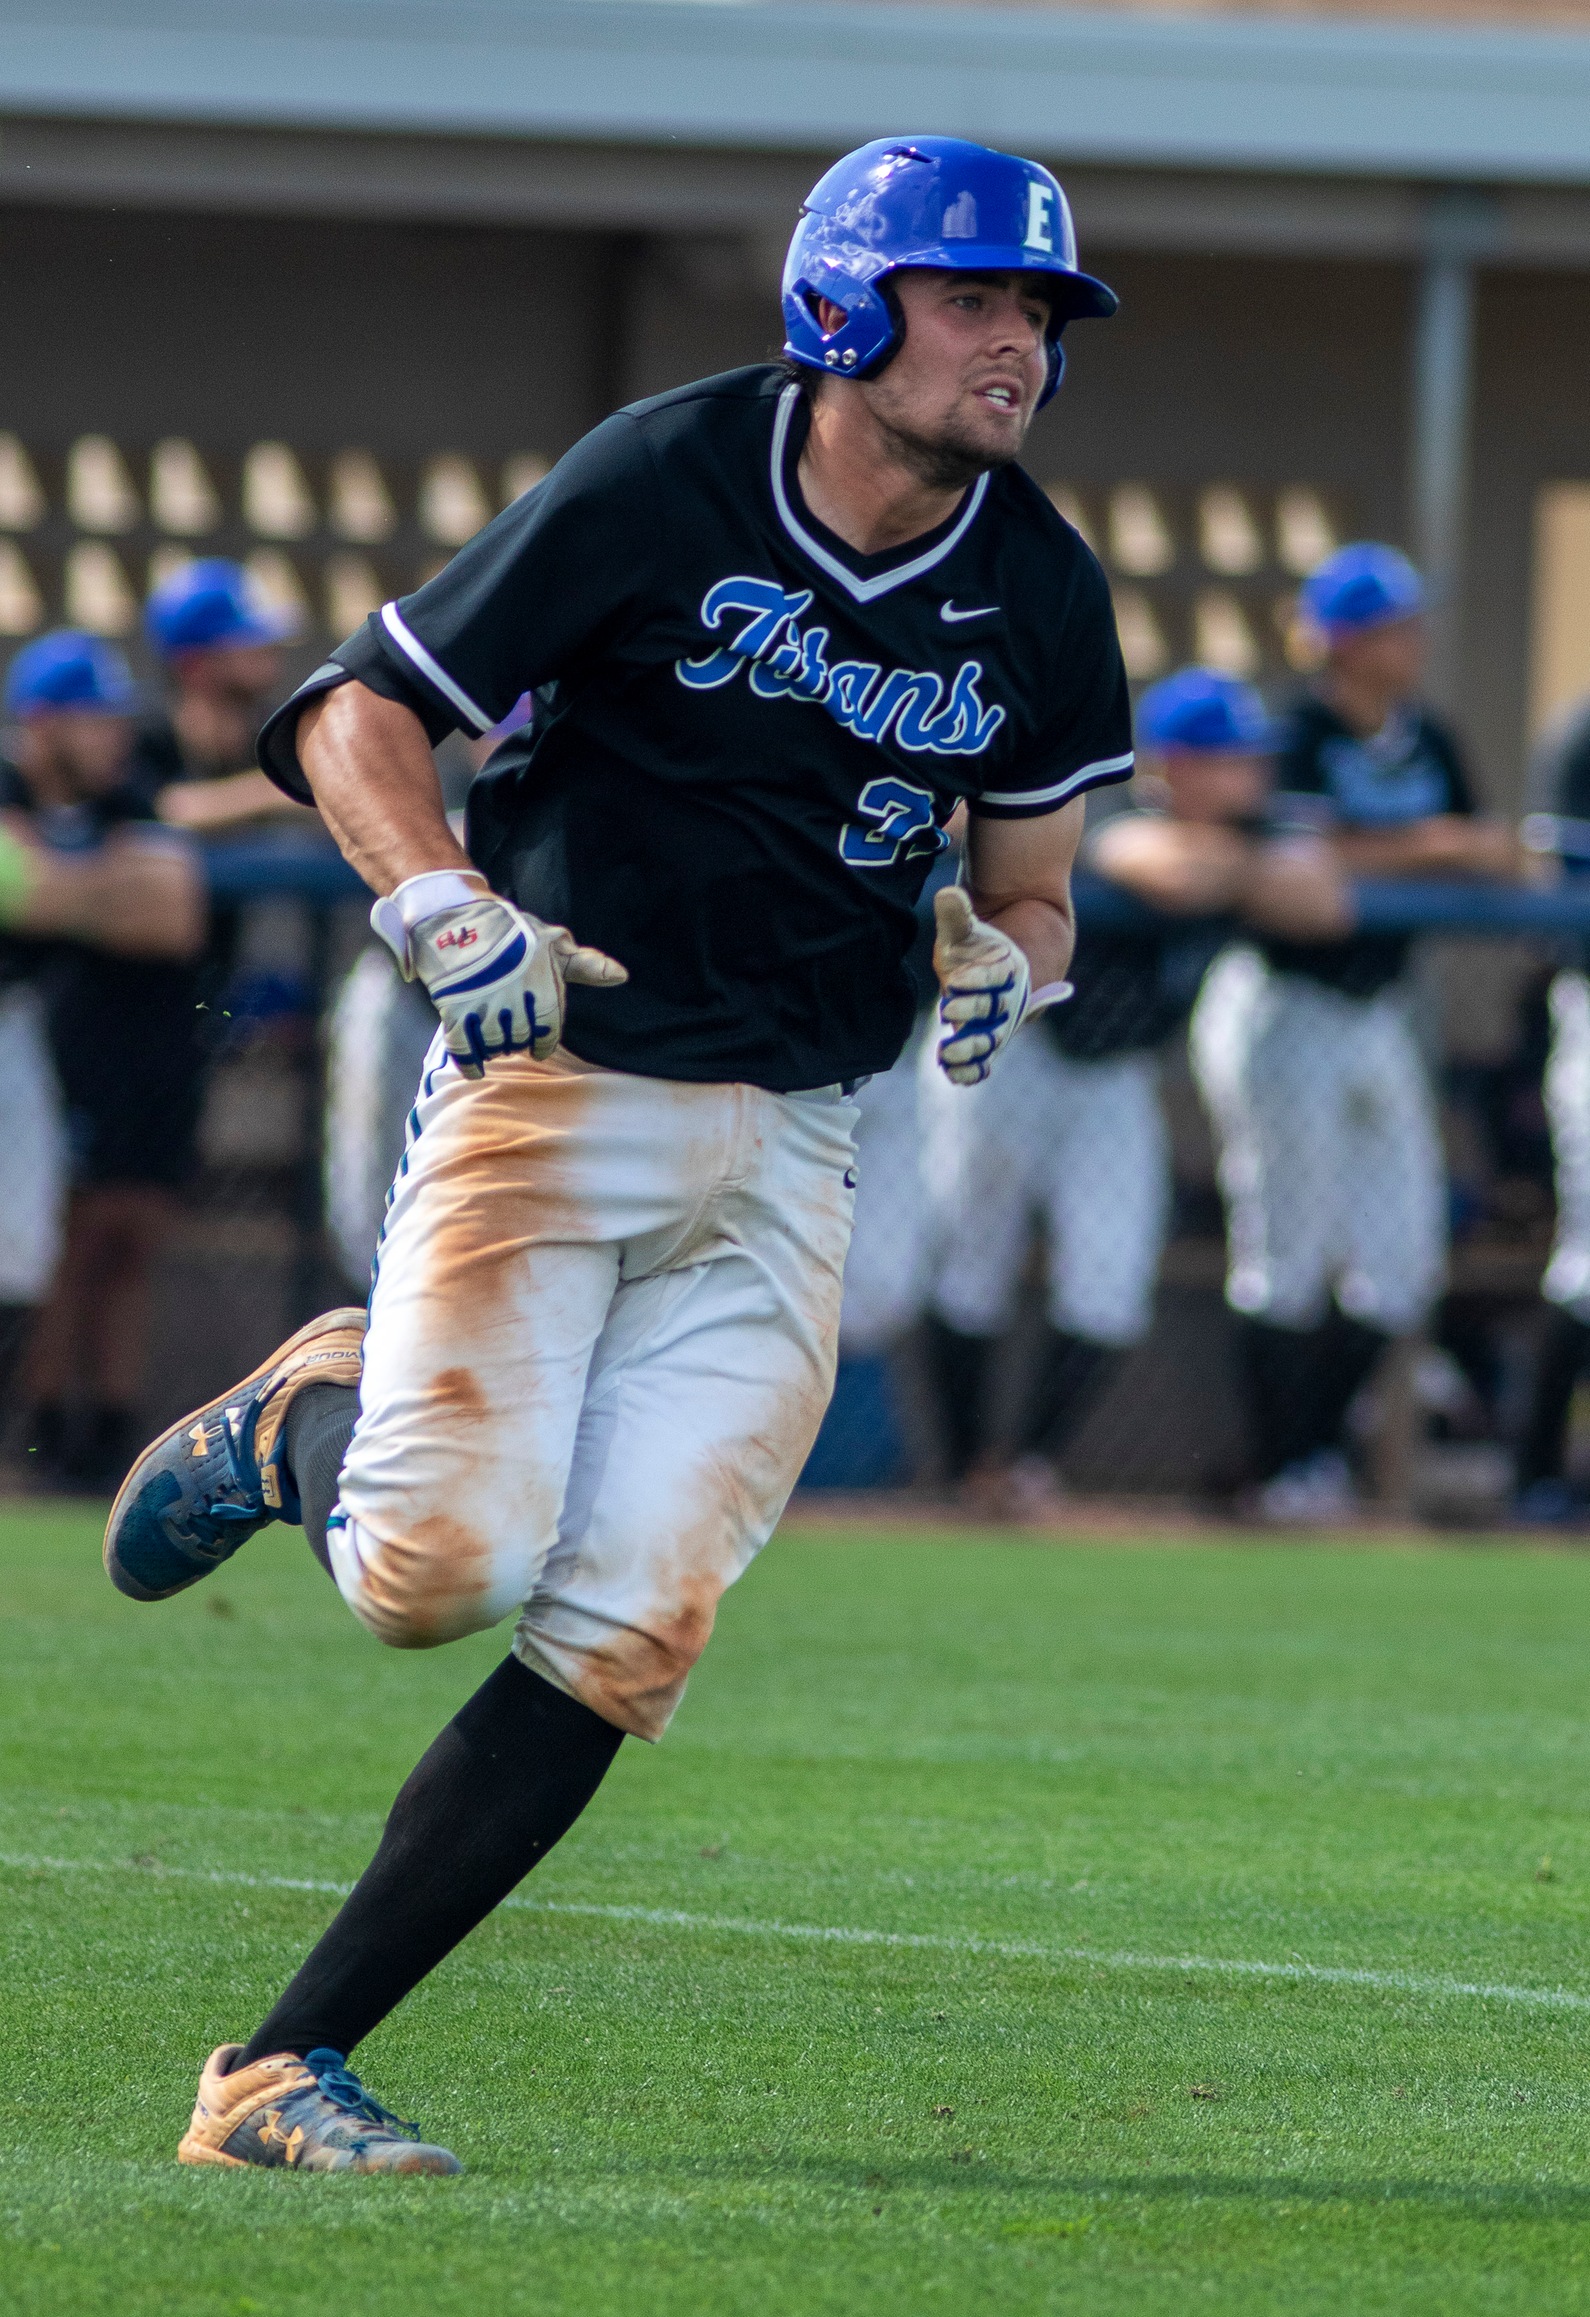 Catcher Drew Cavanaugh named to All-State Second Team